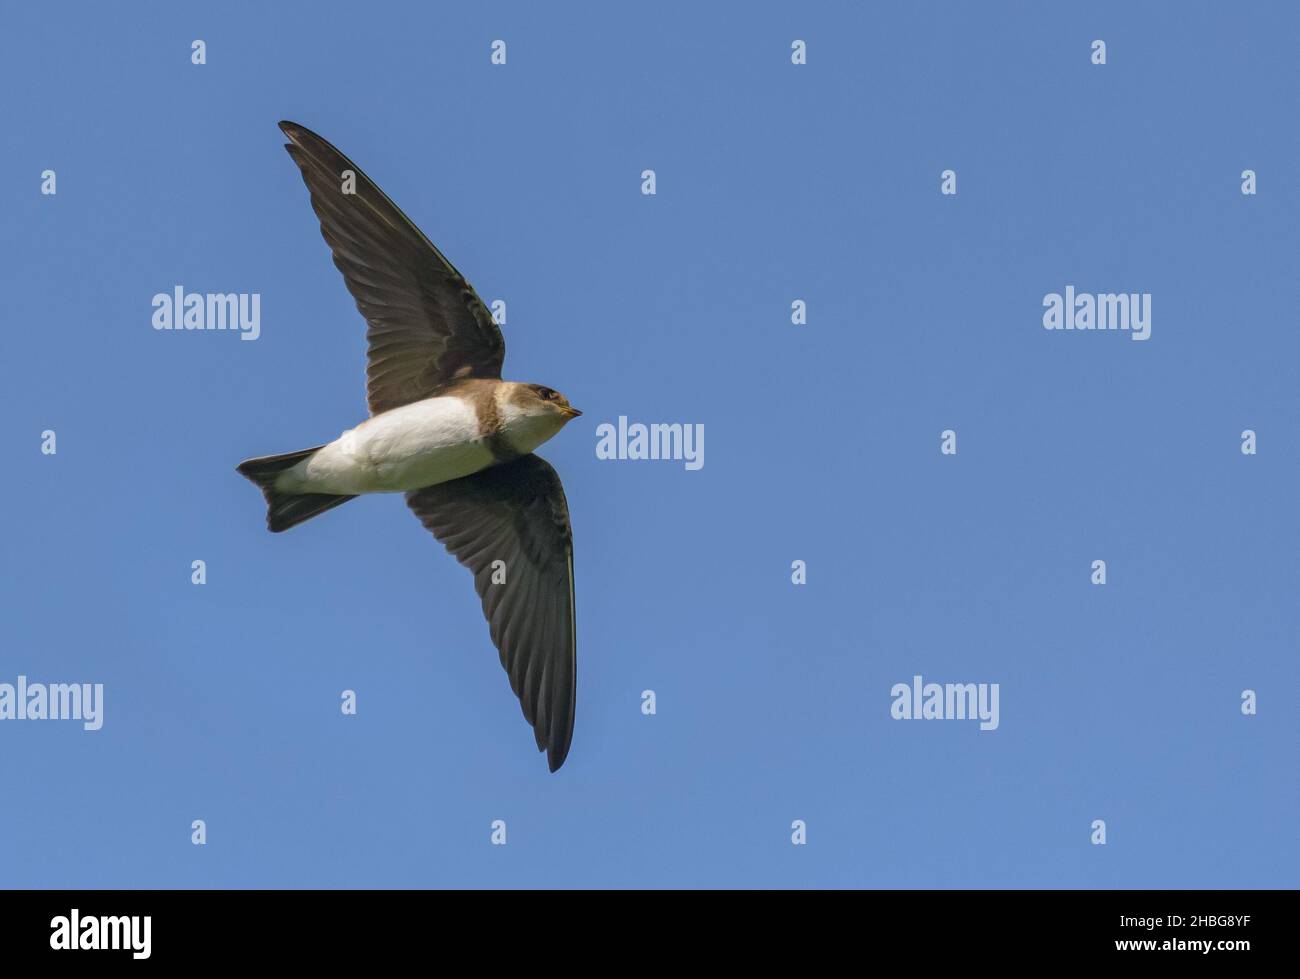 Sand martin (Riparia riparia) flying over rich blue sky with spreaded wings Stock Photo